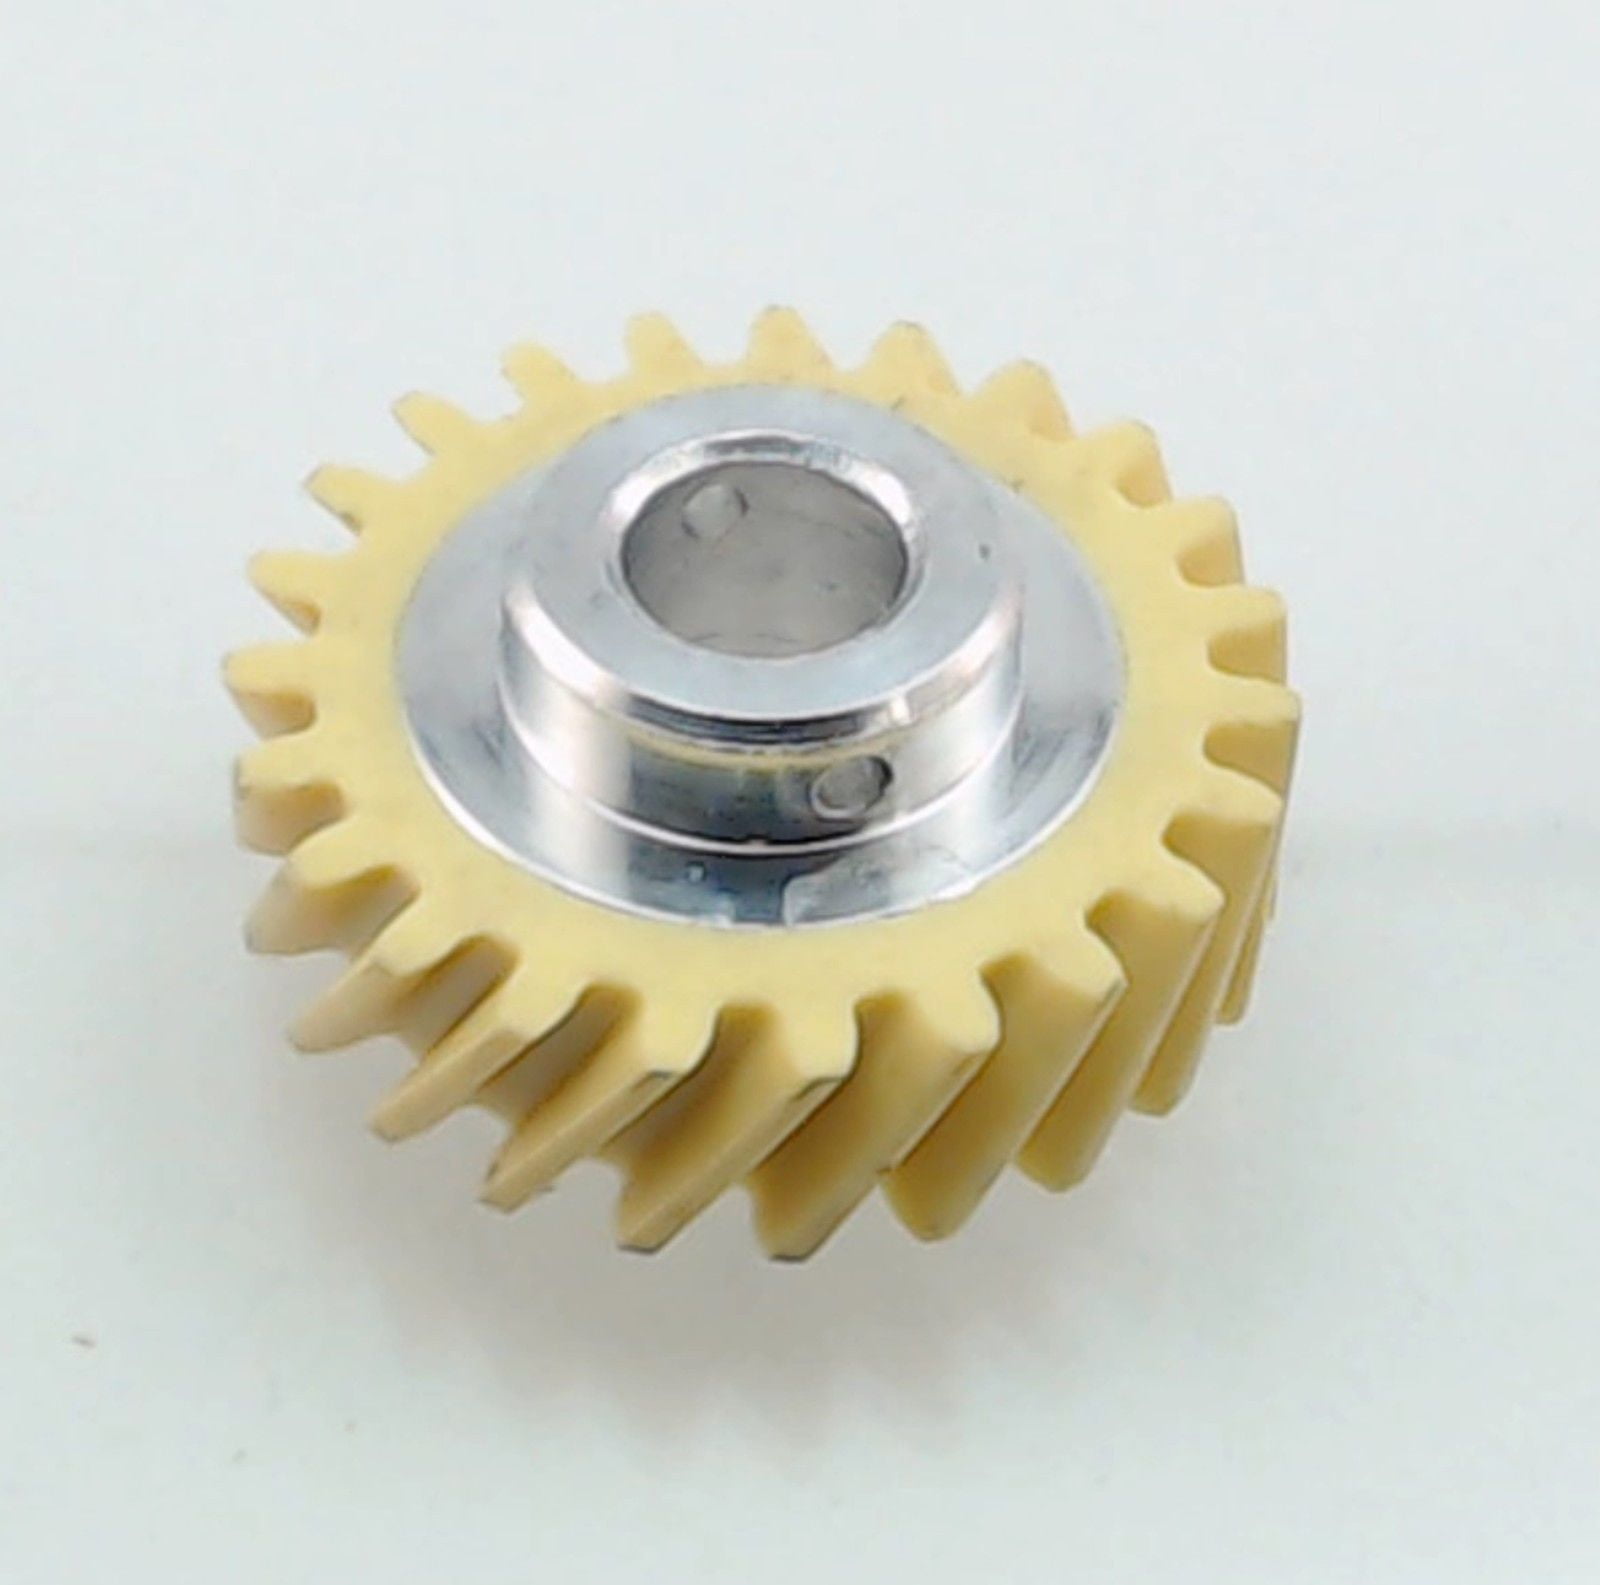 K5SS k45 Kitchenaid mixer worm gear for blender eggbeater foaming machine  nylon gears replacement parts